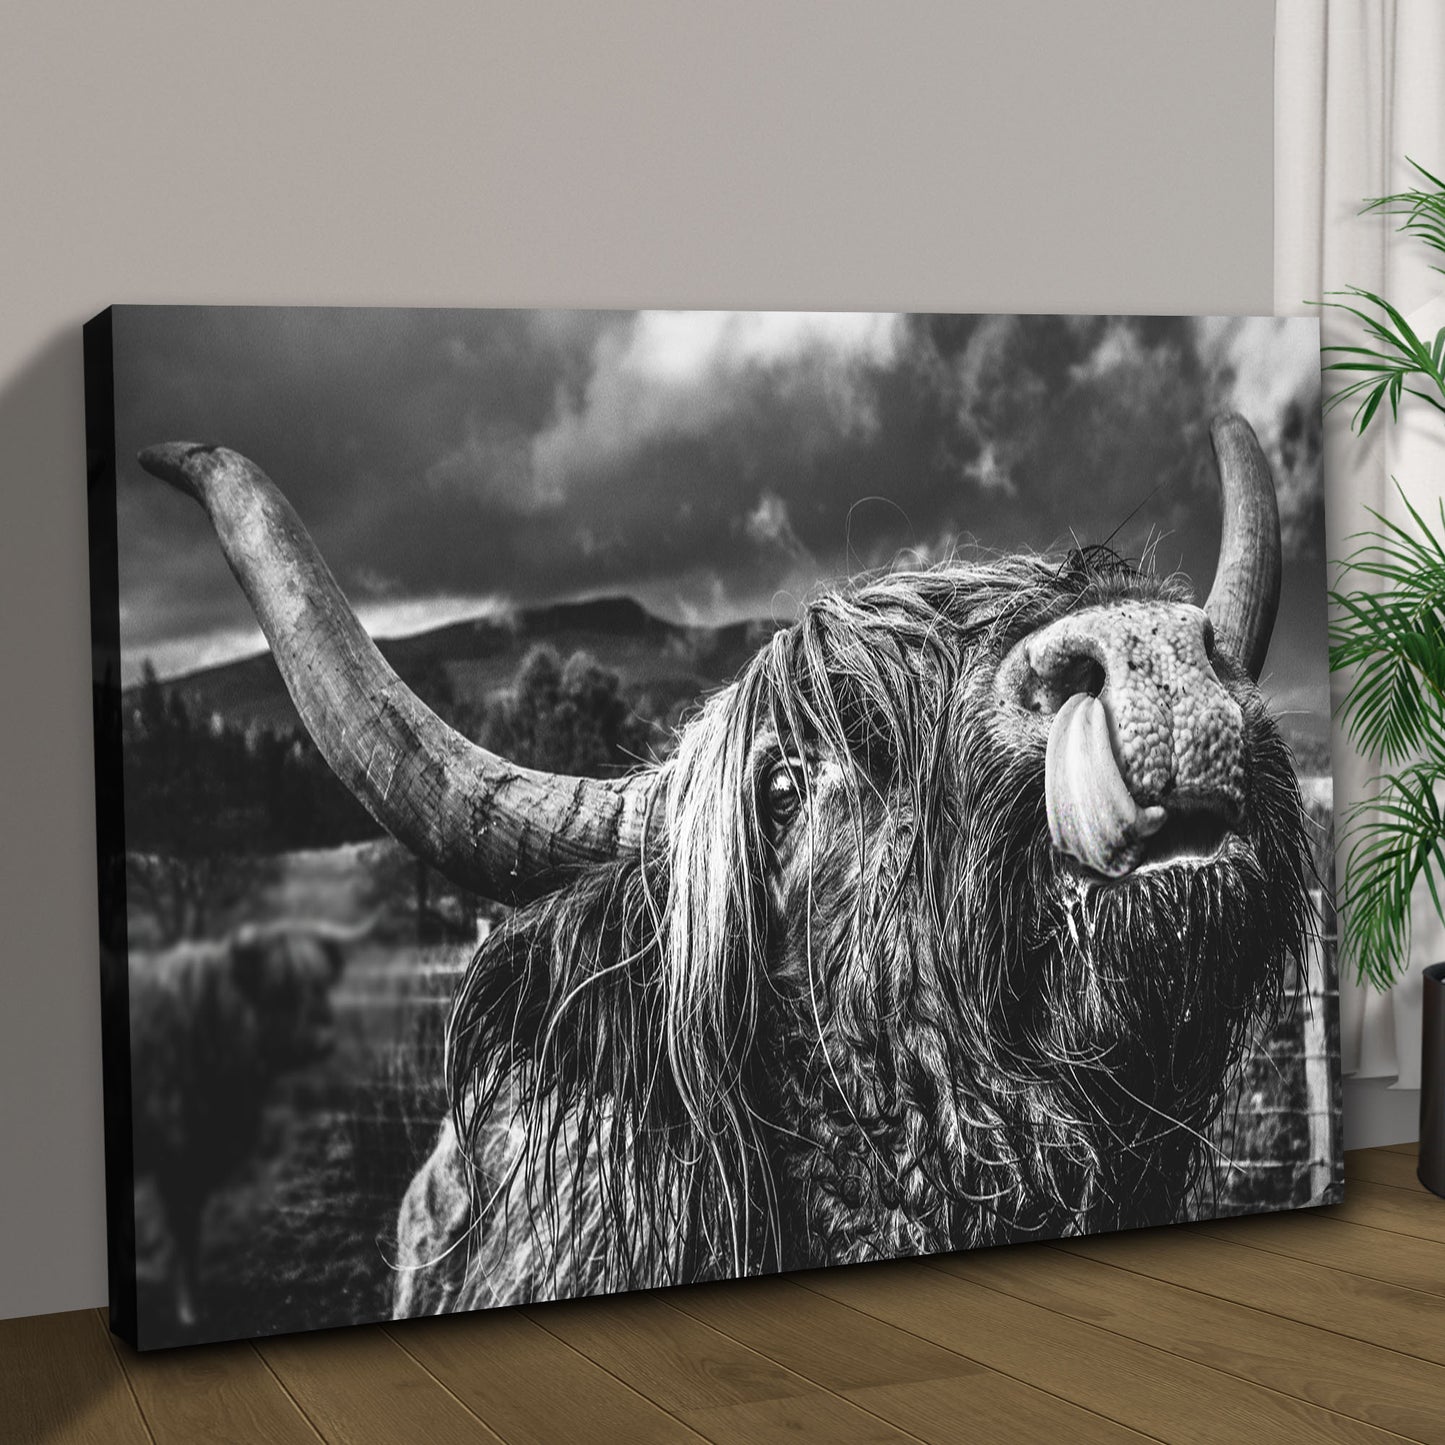 West Highland Cow Monochrome Canvas Wall Art Style 1 - Image by Tailored Canvases